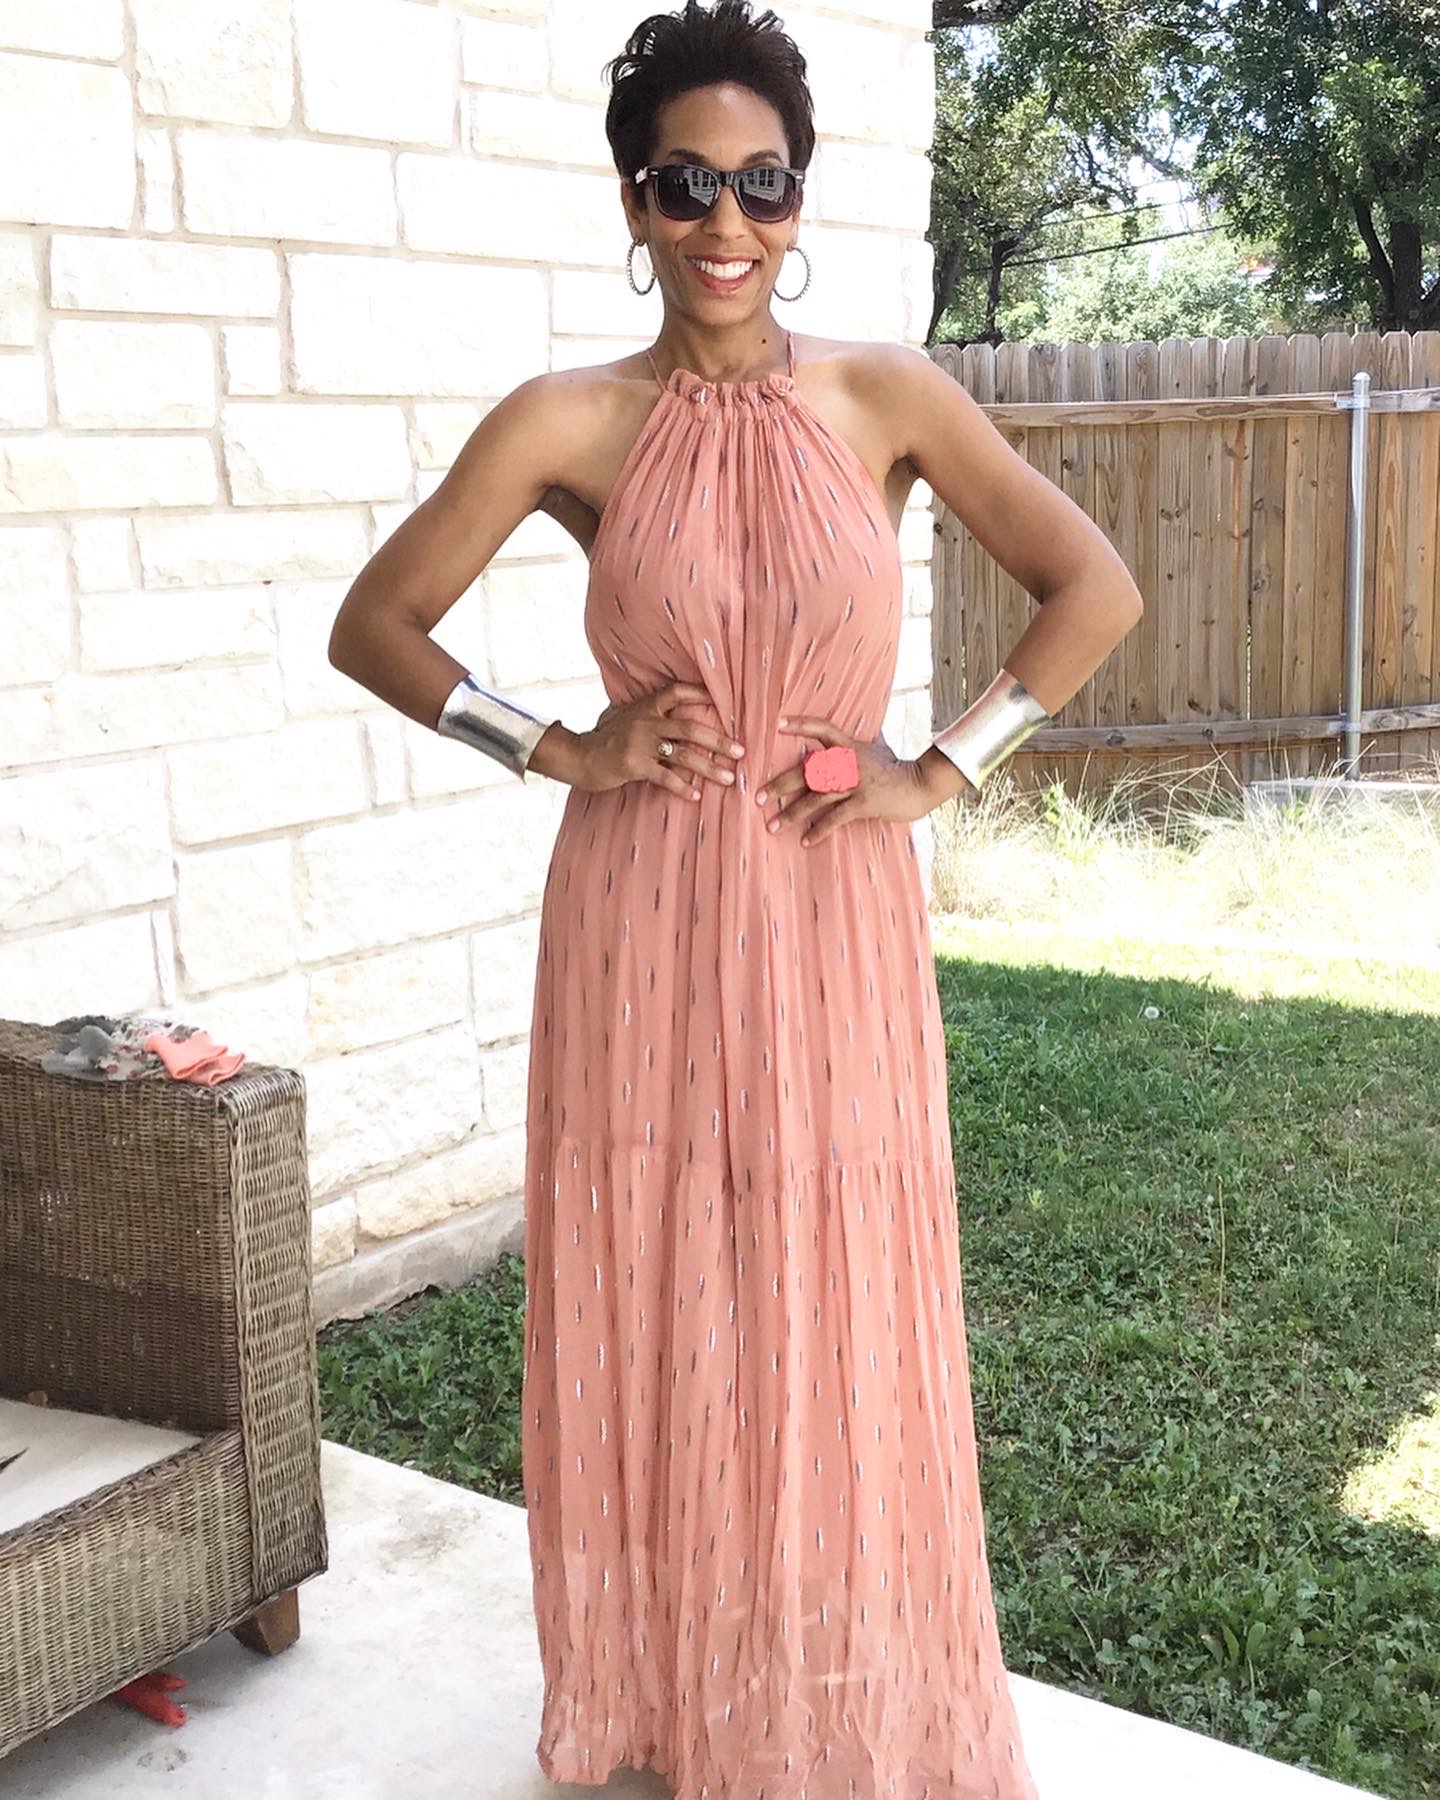 ReStylist Catenya McHenry shows Nothing2Wear: 2 Ways to Wear a Summer Maxi Dress from World Market